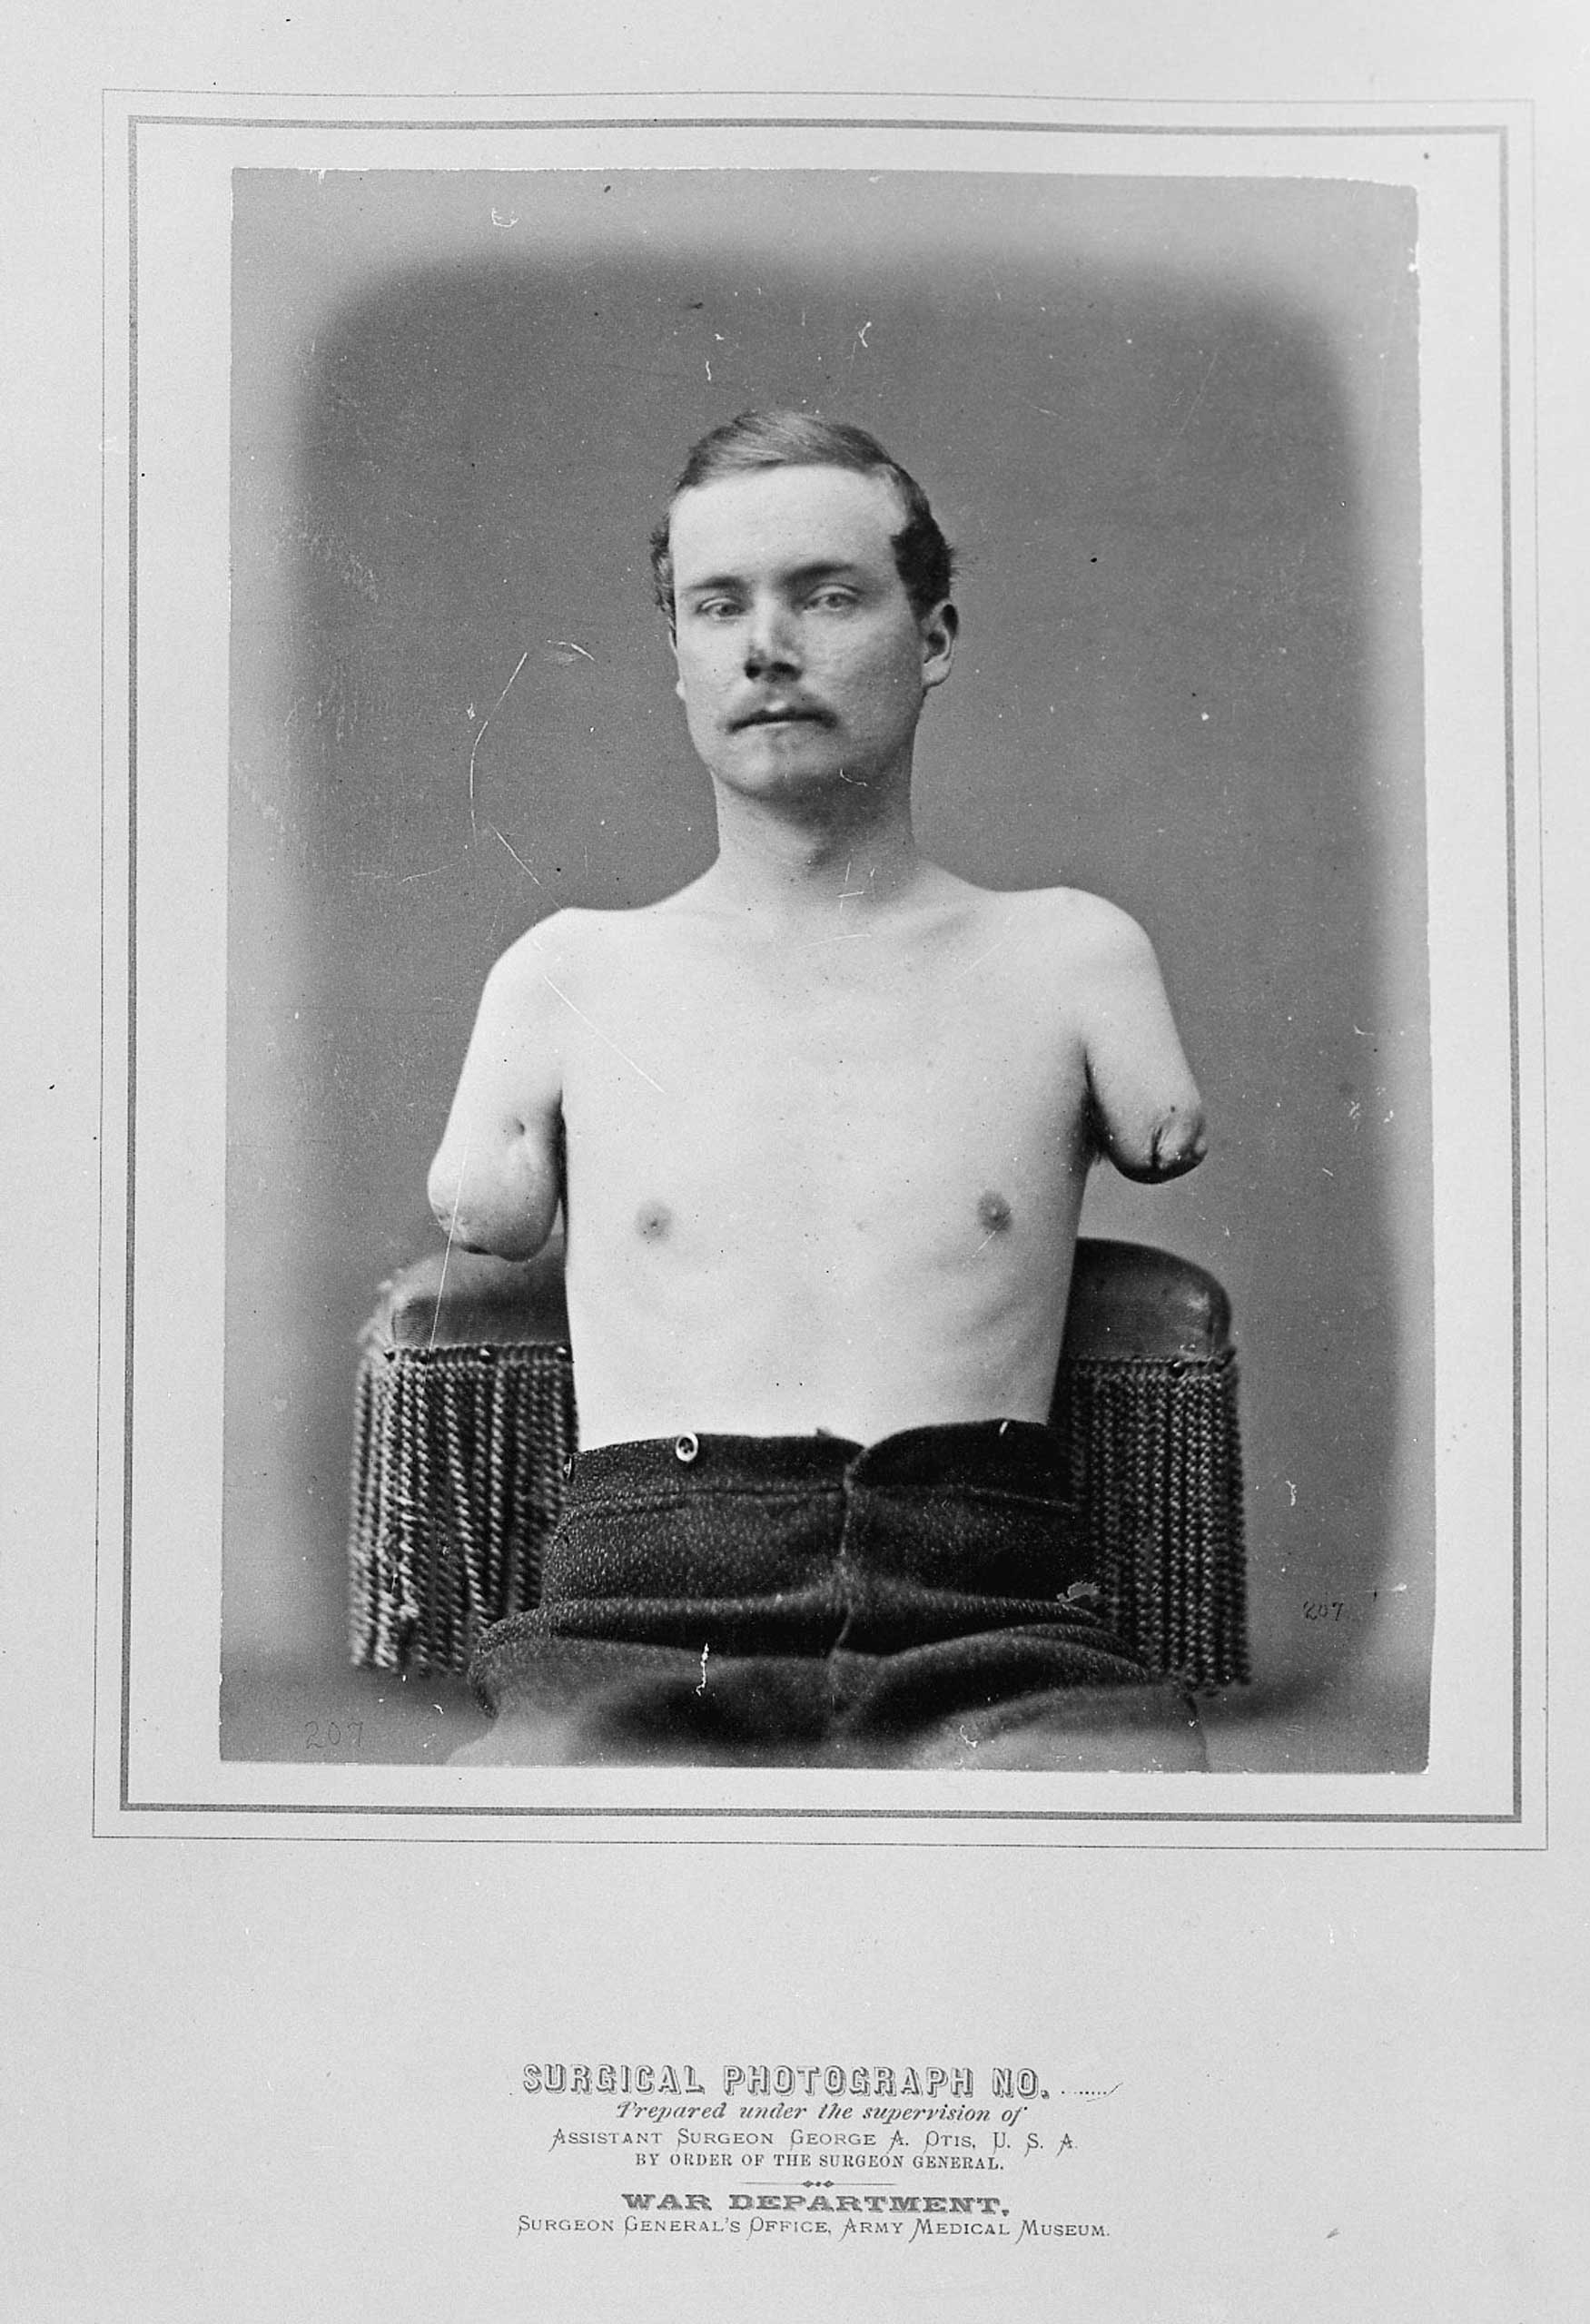 A surgical photo from the Surgeon General's War Department shows an injured soldier with both arms amputated.